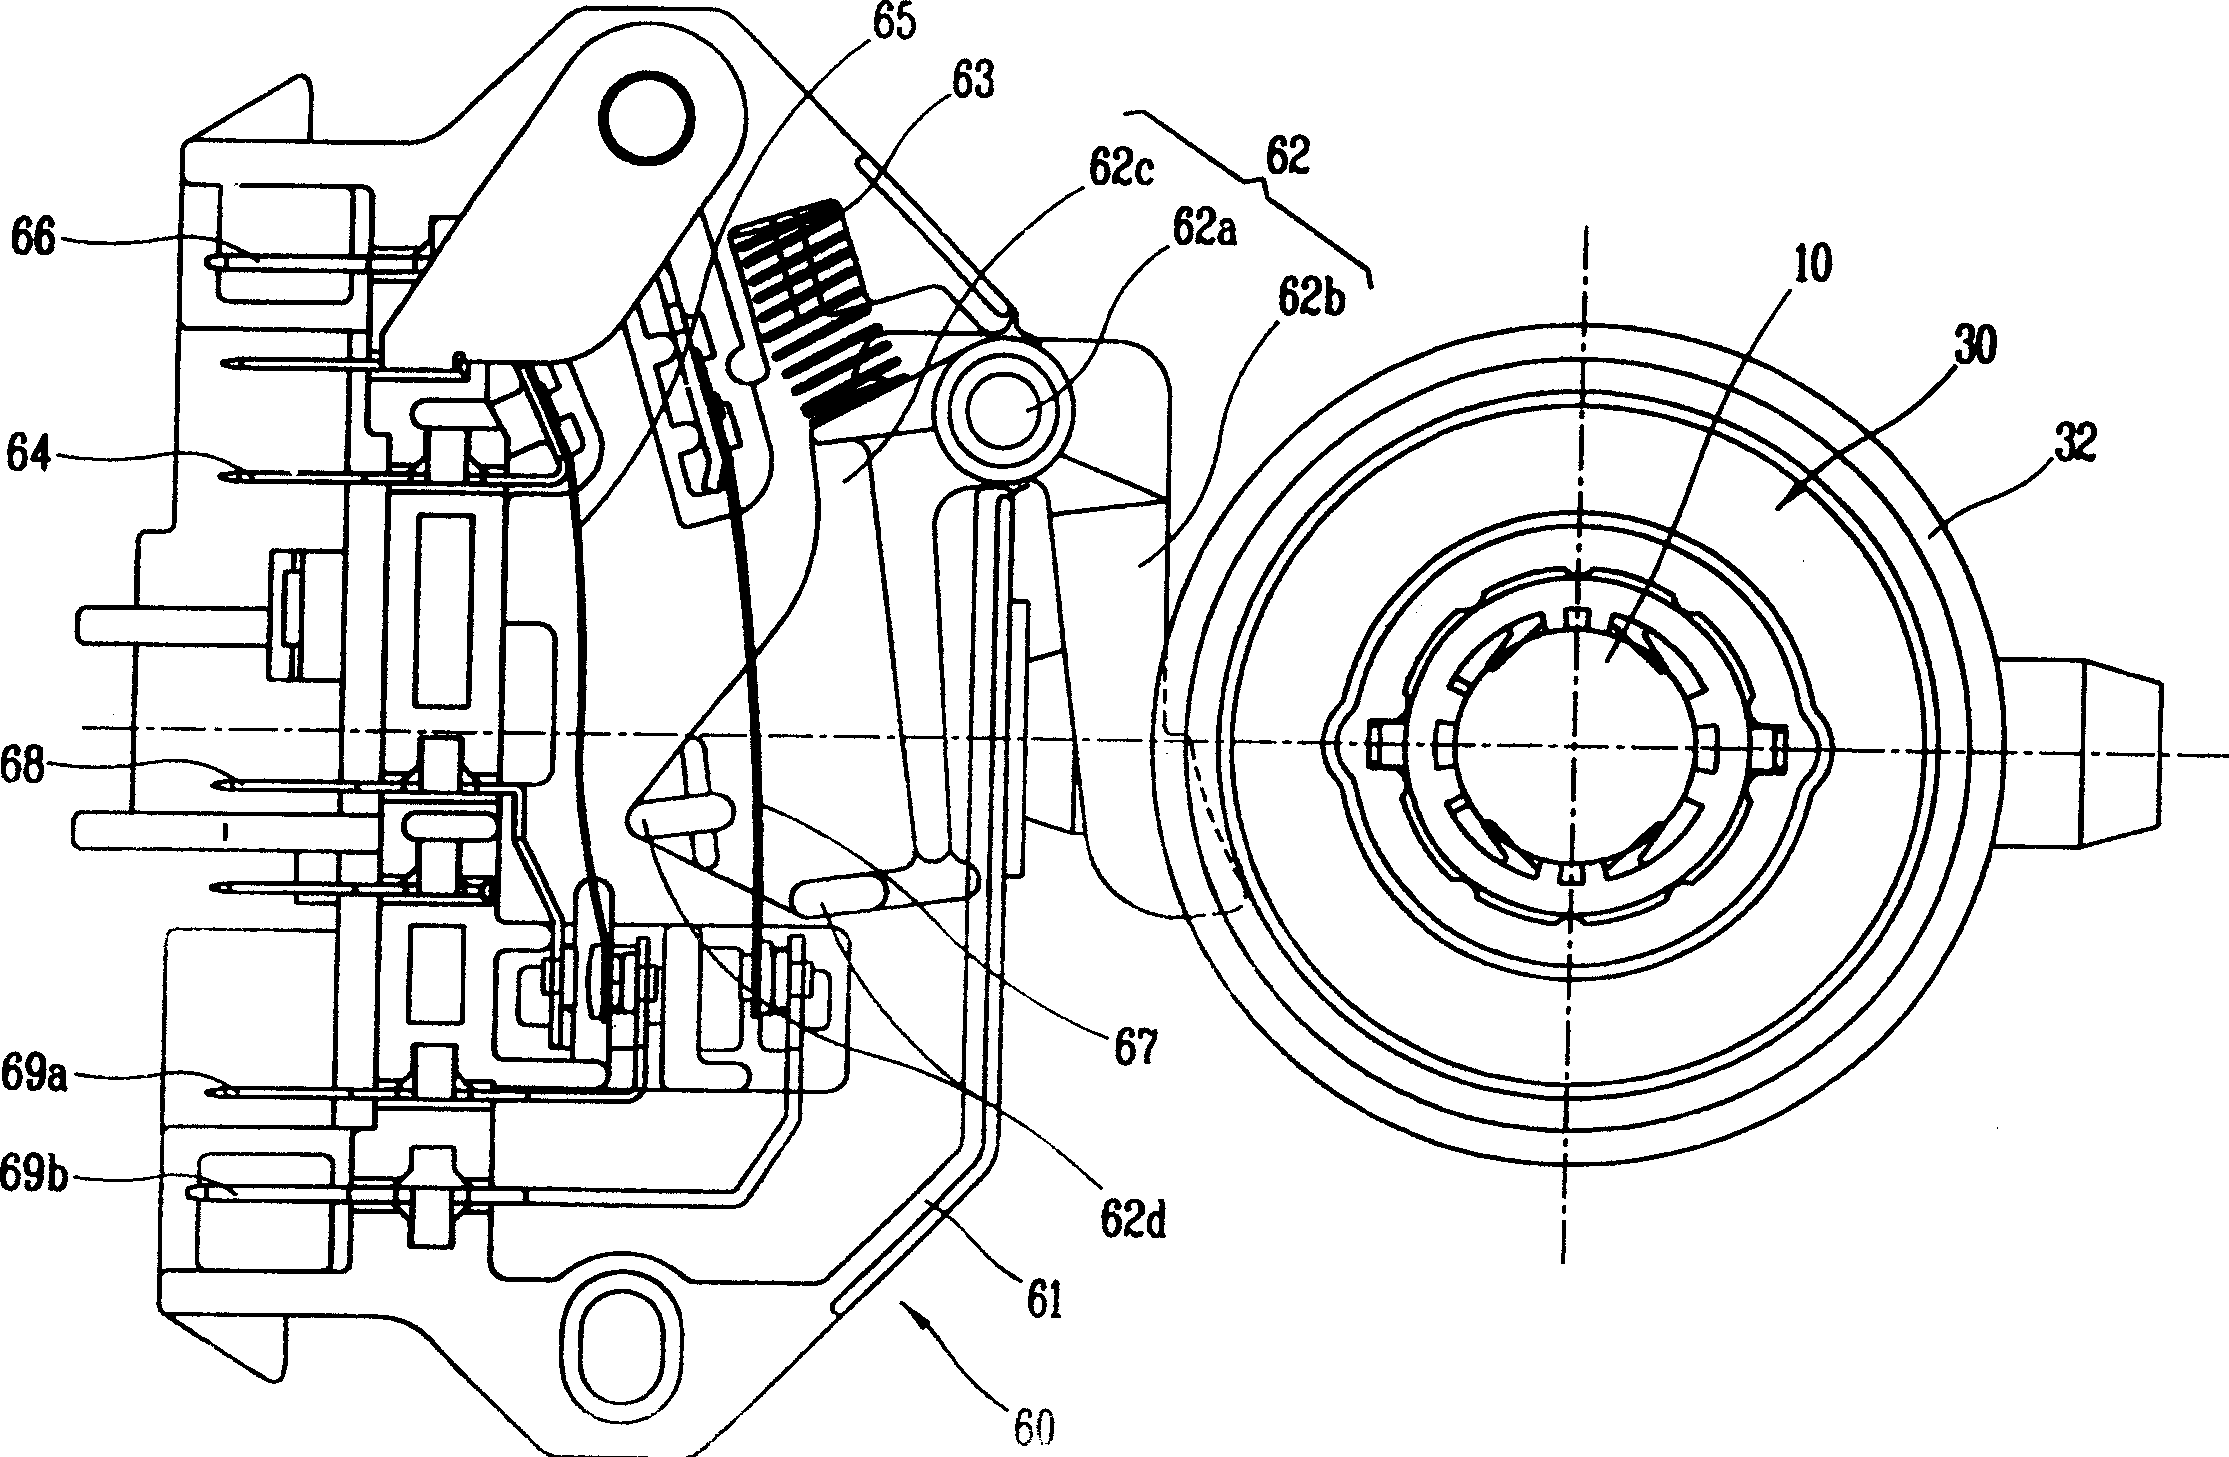 Centrifugal switch structure of single phase induction motor